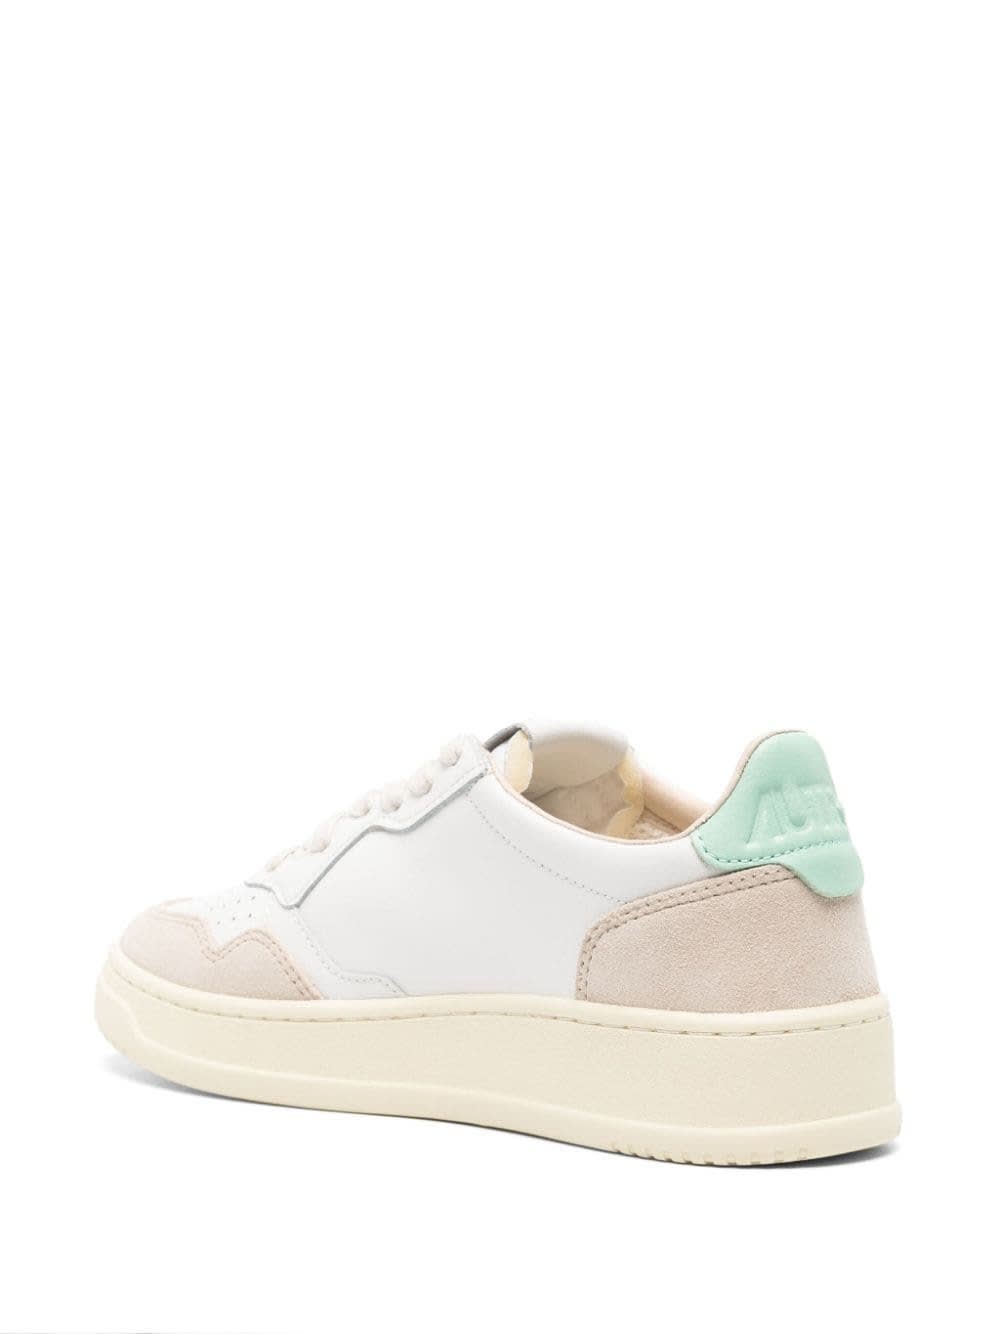 Shop Autry Medalist Low Sneakers In White And Aqua Green Suede And Leather